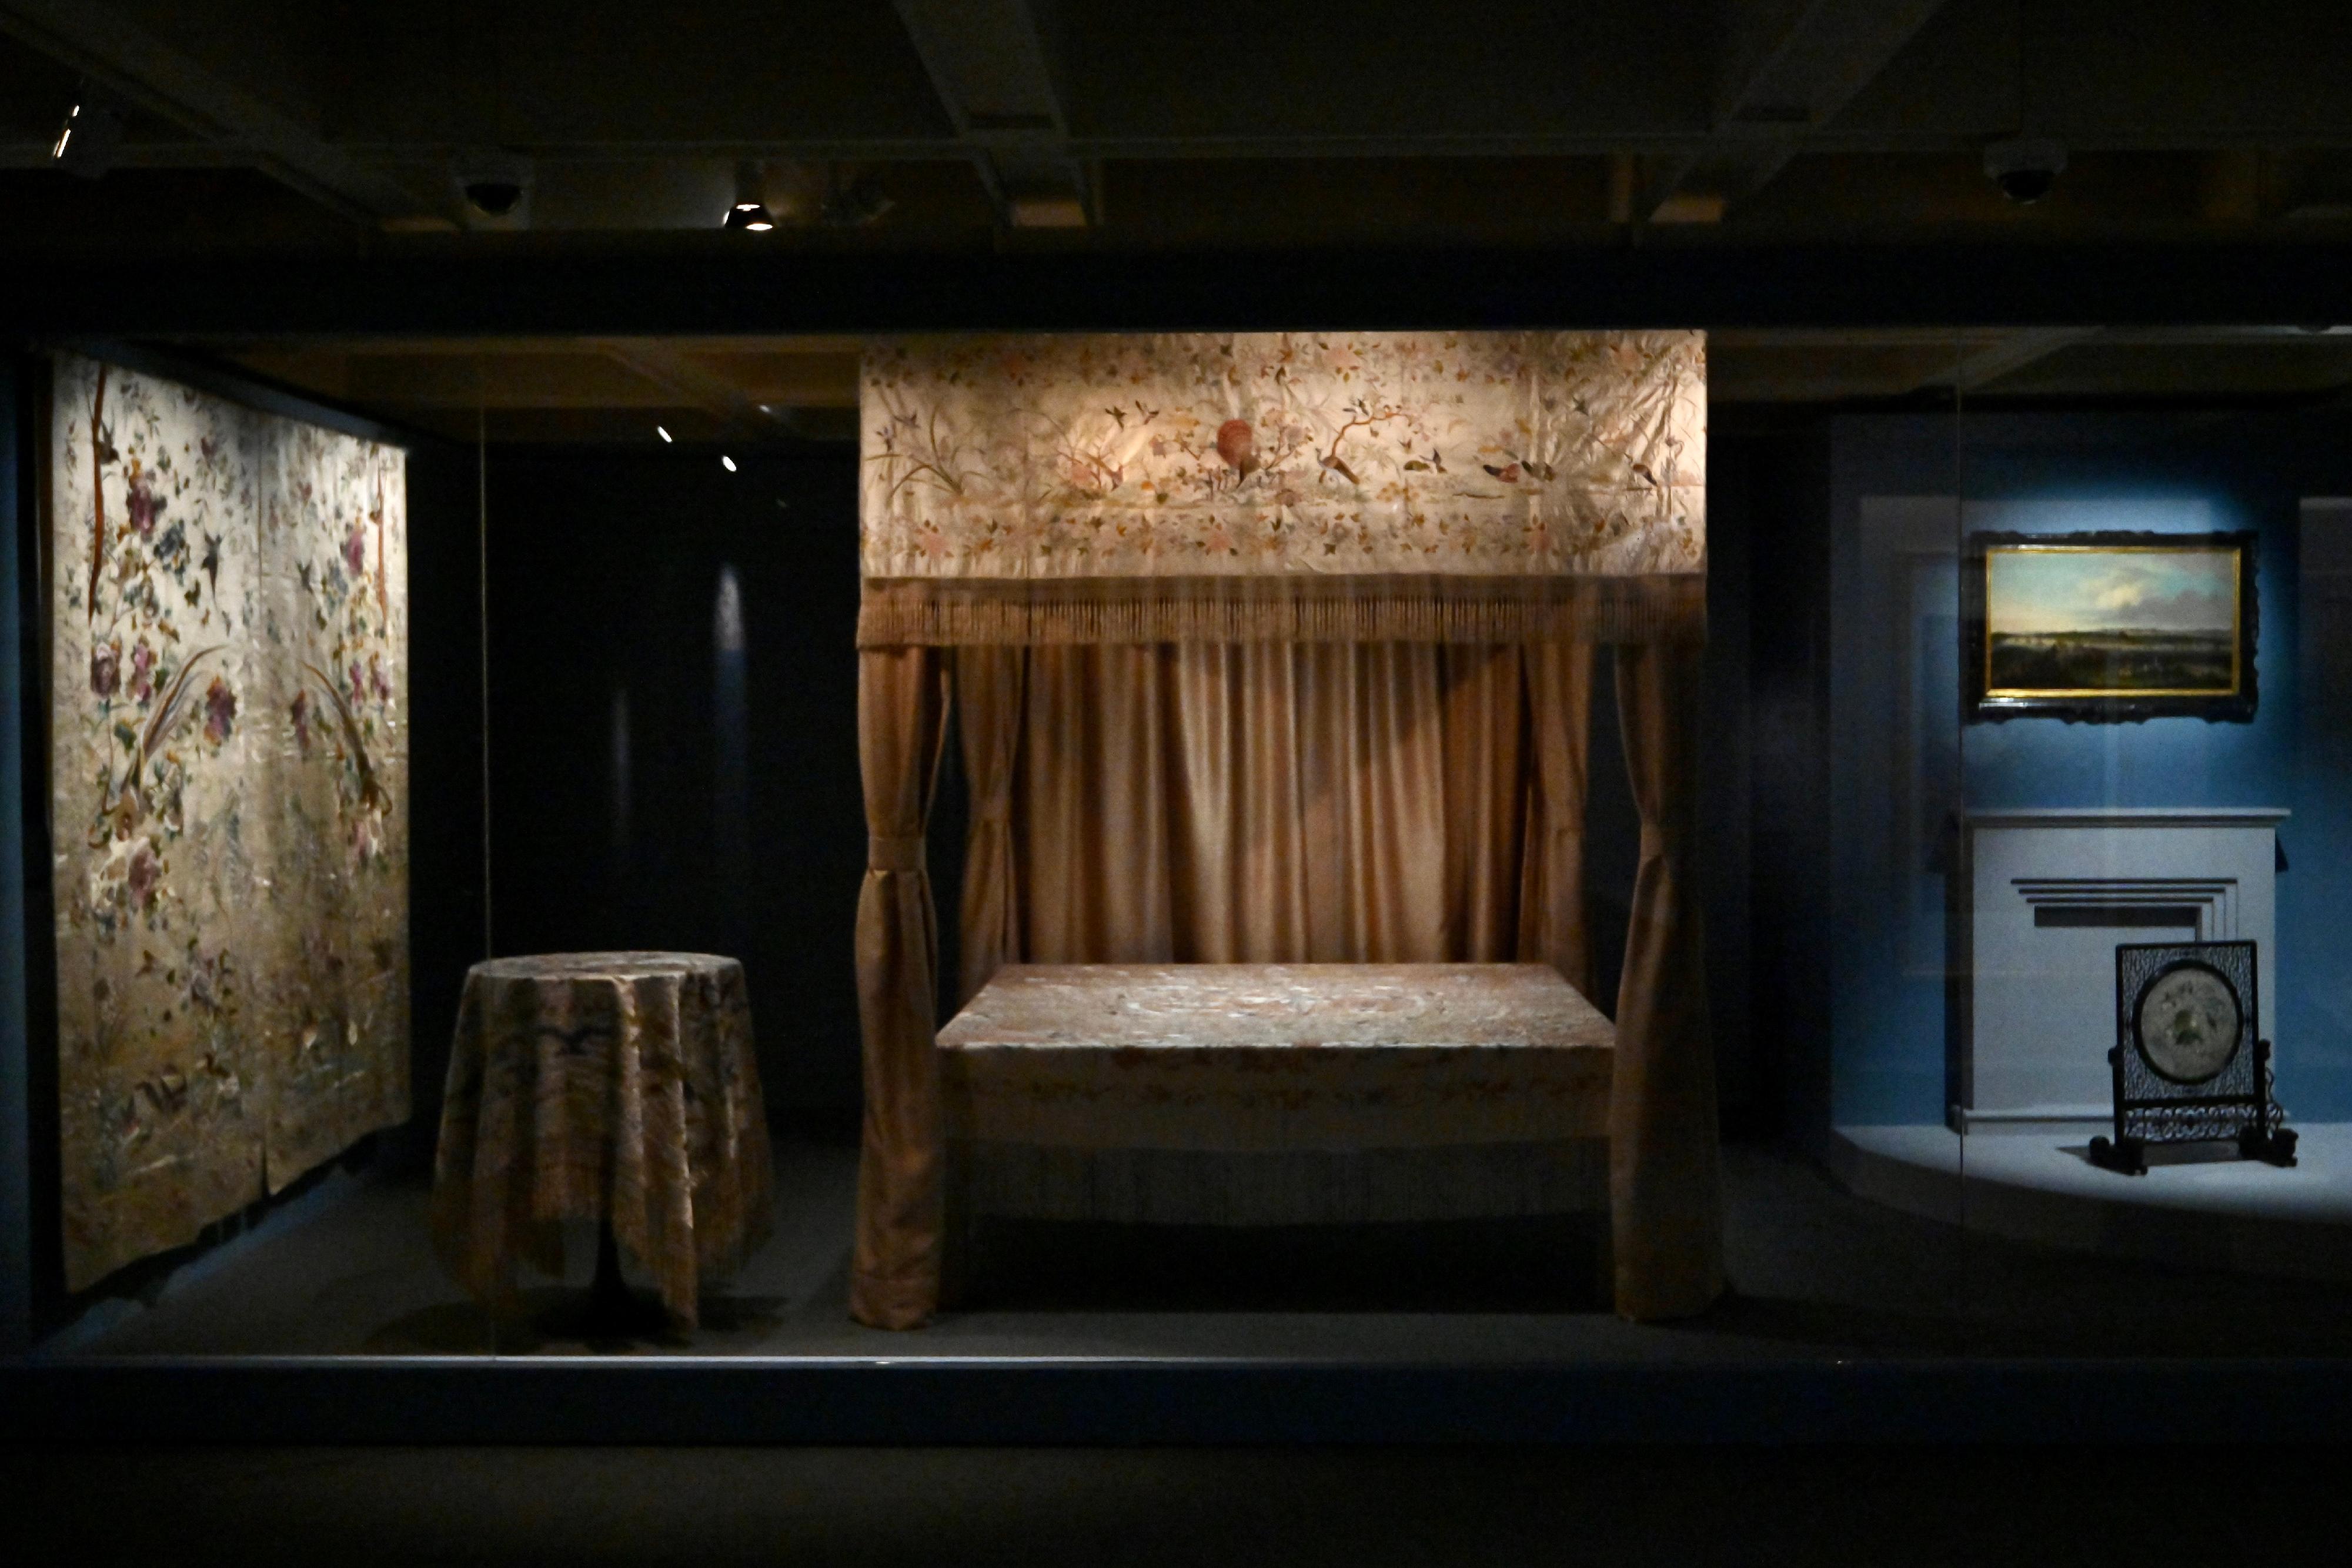 The opening ceremony of the Hong Kong stop of the touring exhibition "A Tale of Three Cities: Guangdong-Hong Kong-Macao Greater Bay Area and Export of Silk Products in the Ming and Qing Dynasties" was held today (September 7) at the Hong Kong Museum of Art. Picture shows a "Chinoiserie" room to showcase home fabrics in the 19th century in the exhibition.